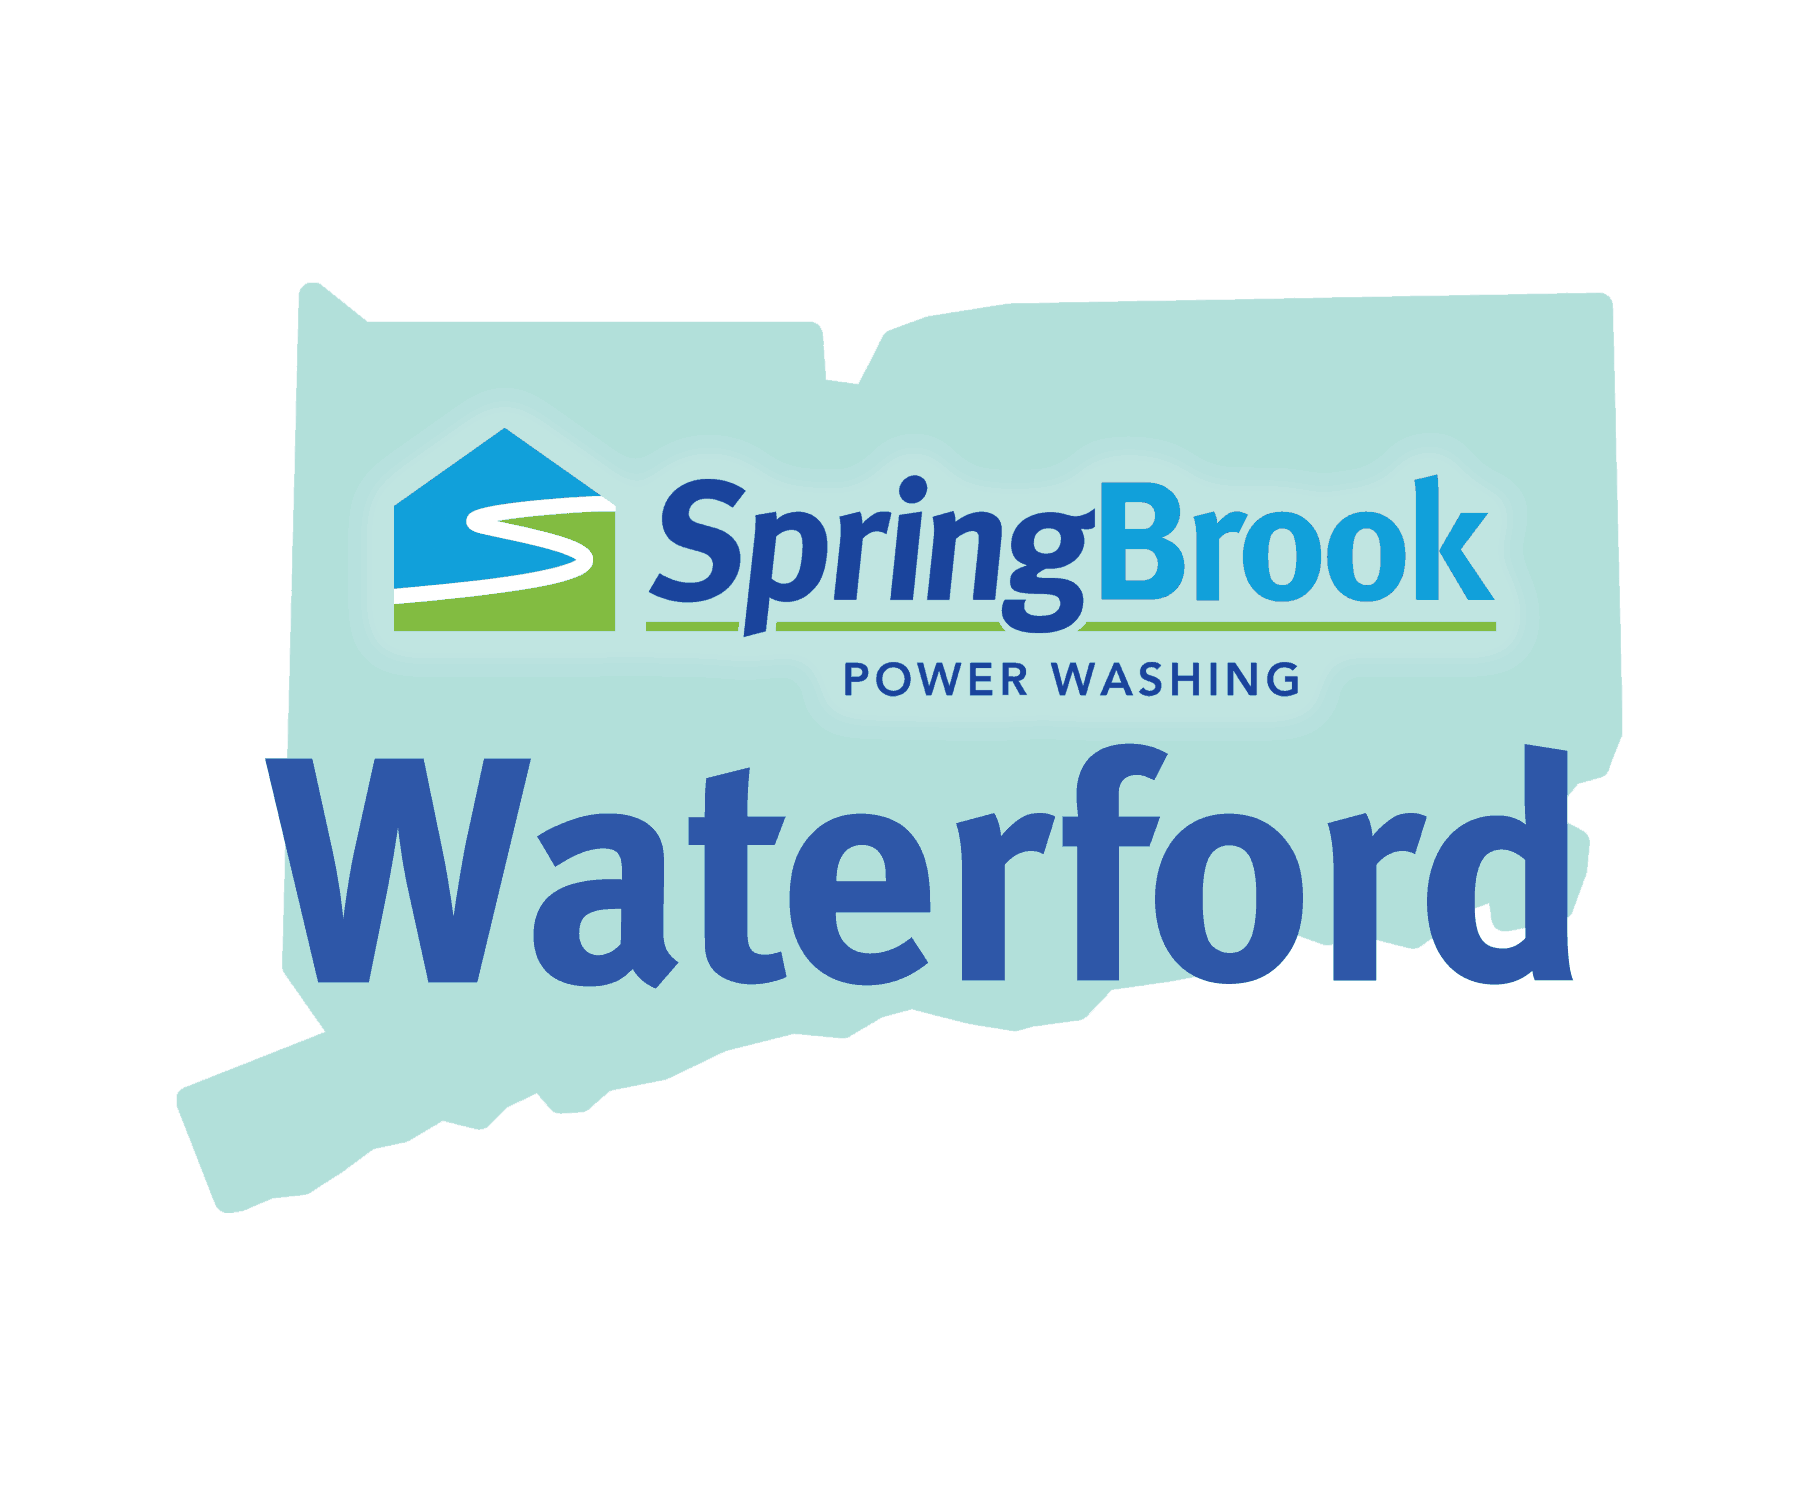 Springbrook Power Washing Waterford Connecticut